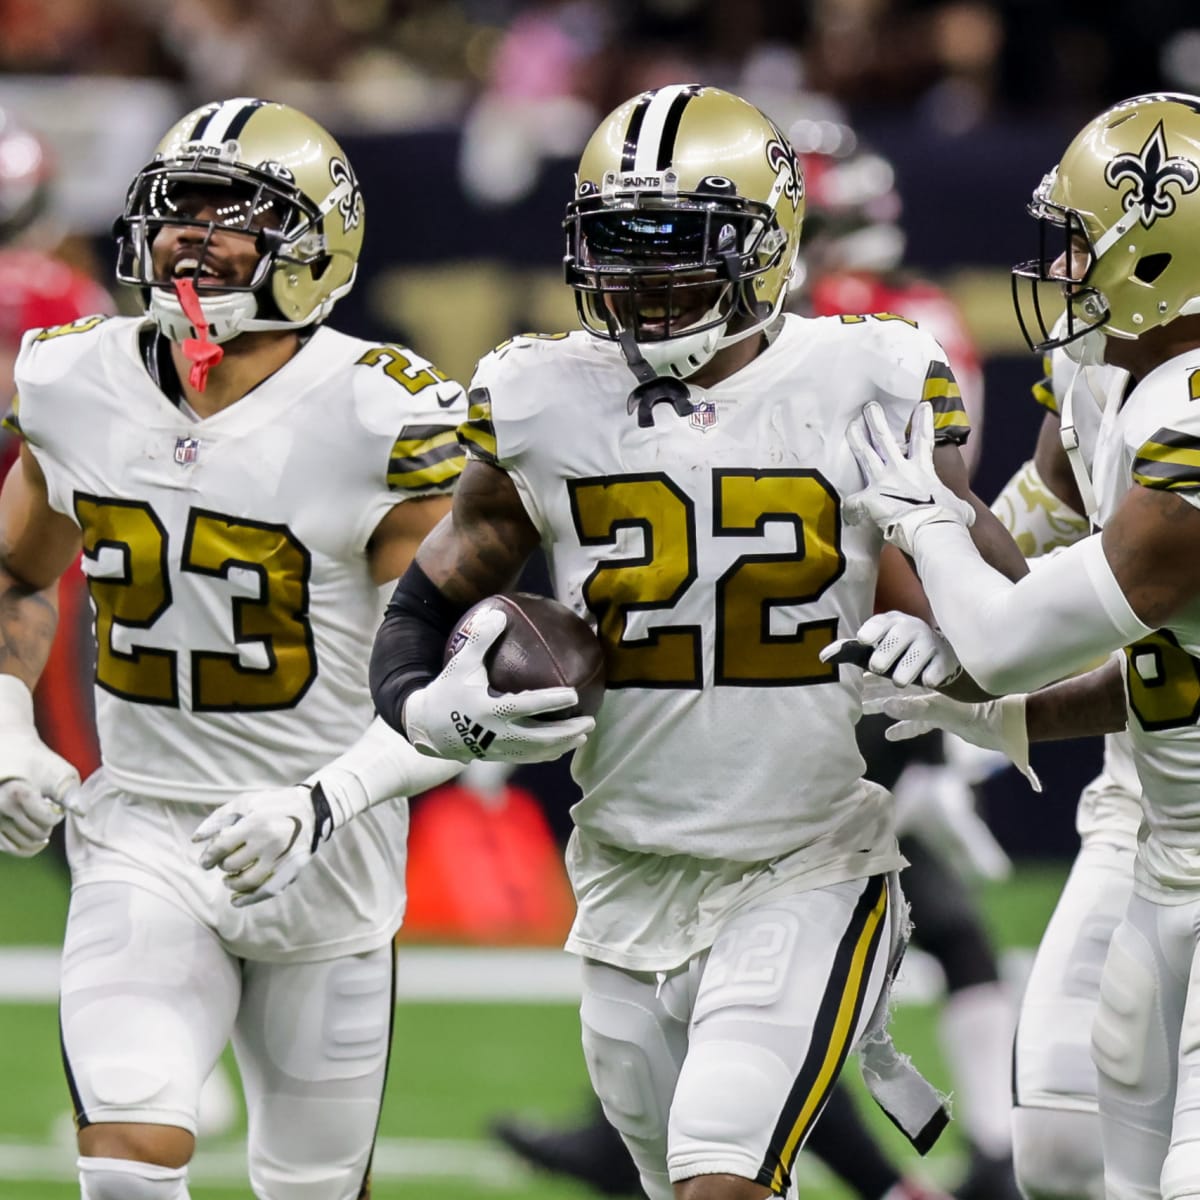 Former Saints' player is already talking trash before this week's